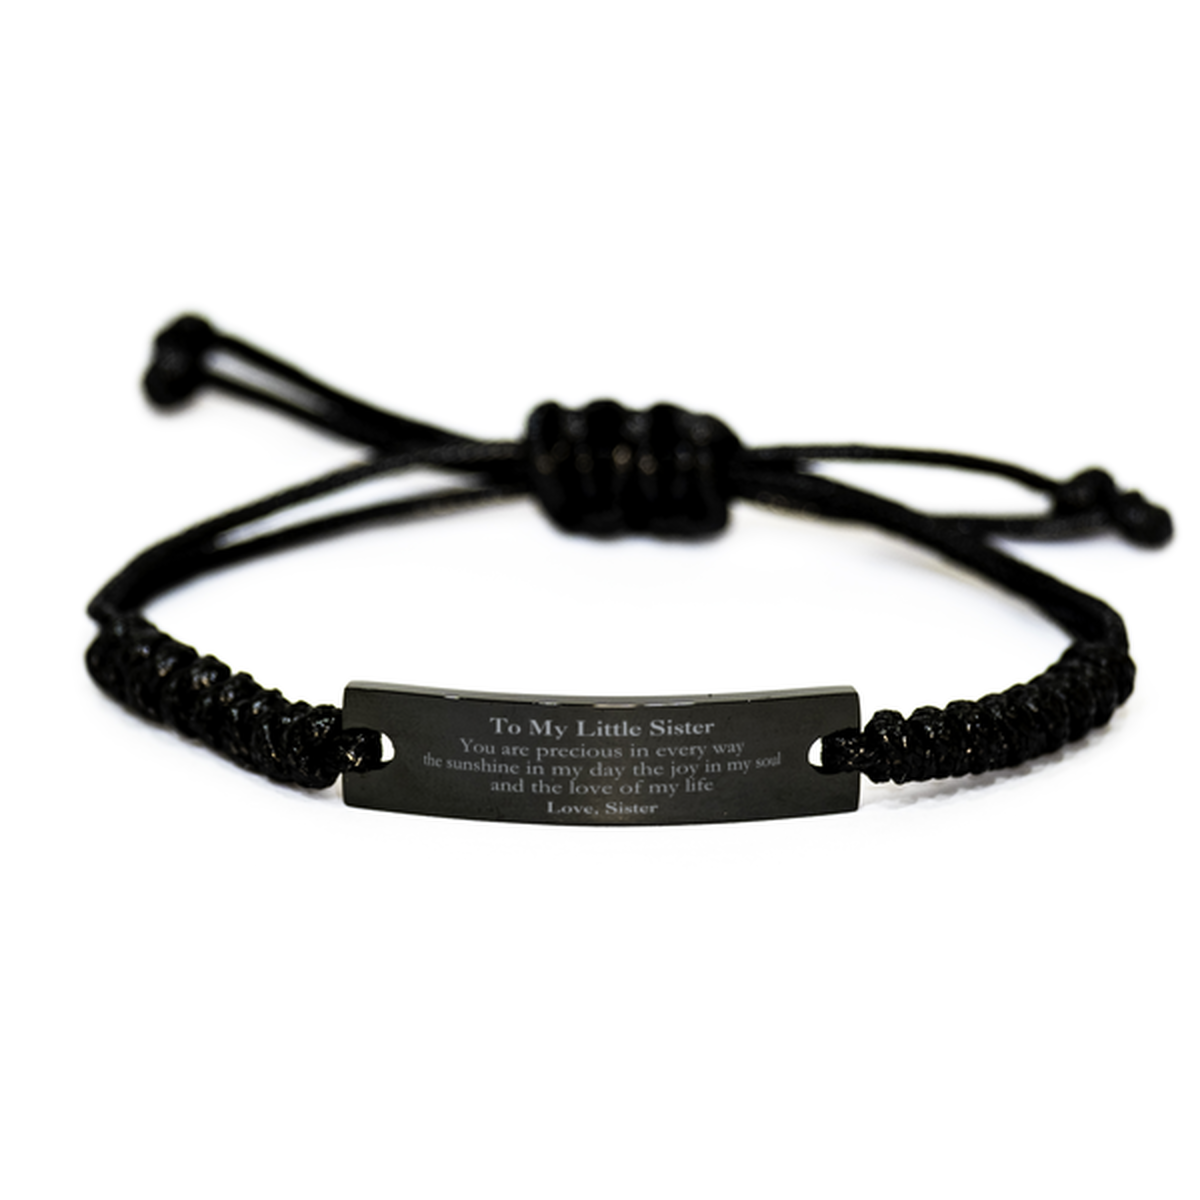 Graduation Gifts for Little Sister Black Rope Bracelet Present from Sister, Christmas Little Sister Birthday Gifts Little Sister You are precious in every way the sunshine in my day. Love, Sister